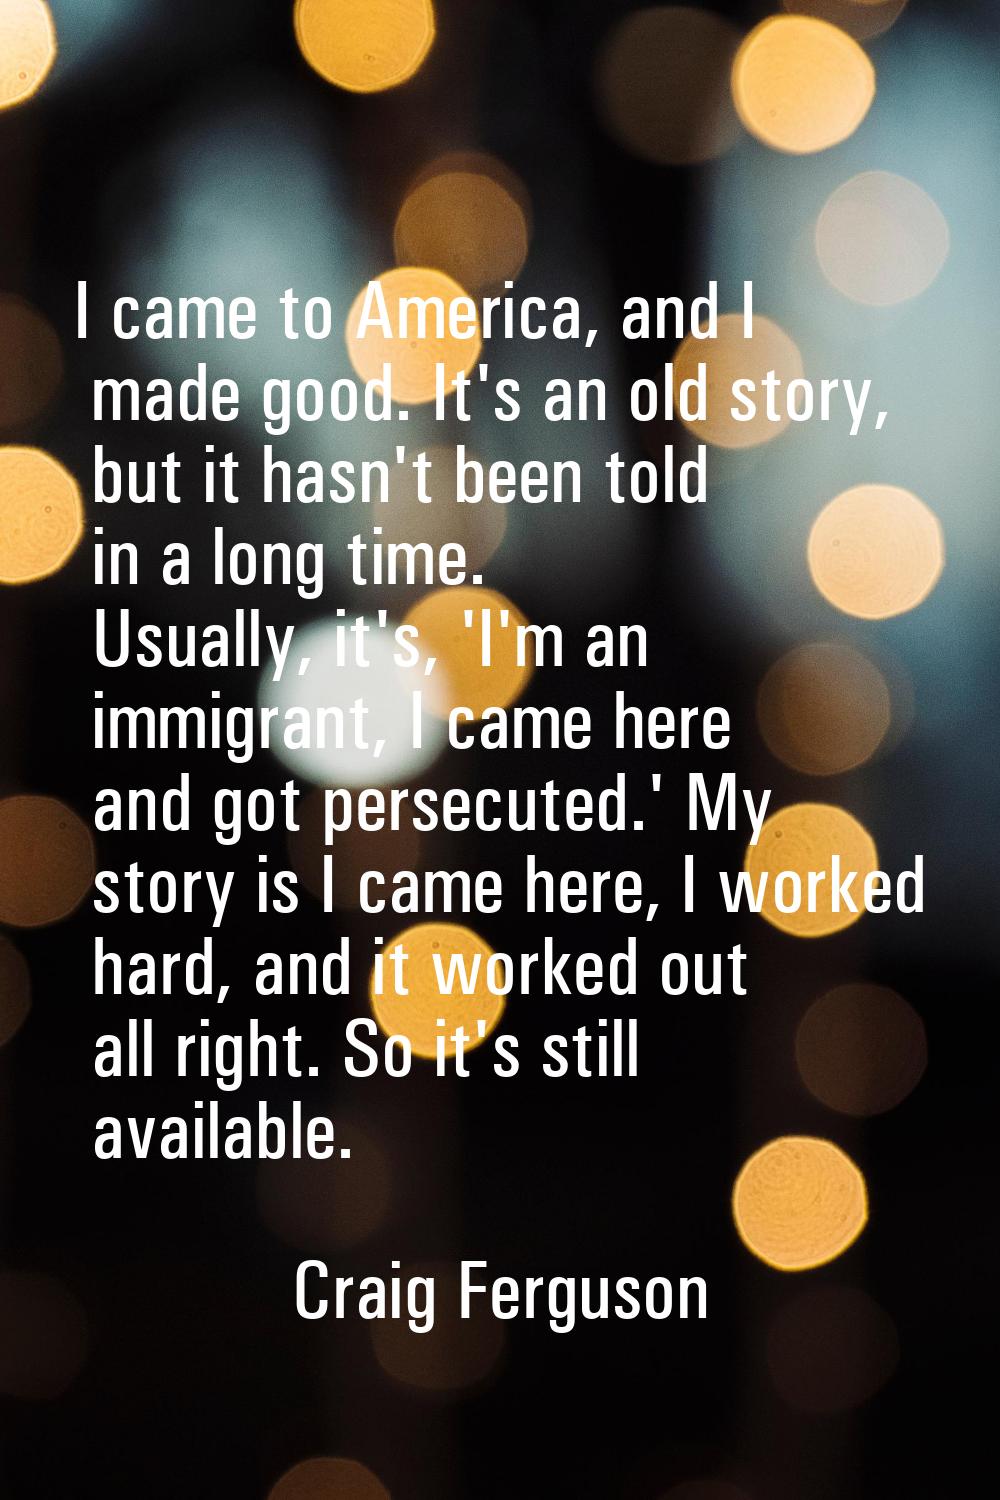 I came to America, and I made good. It's an old story, but it hasn't been told in a long time. Usua